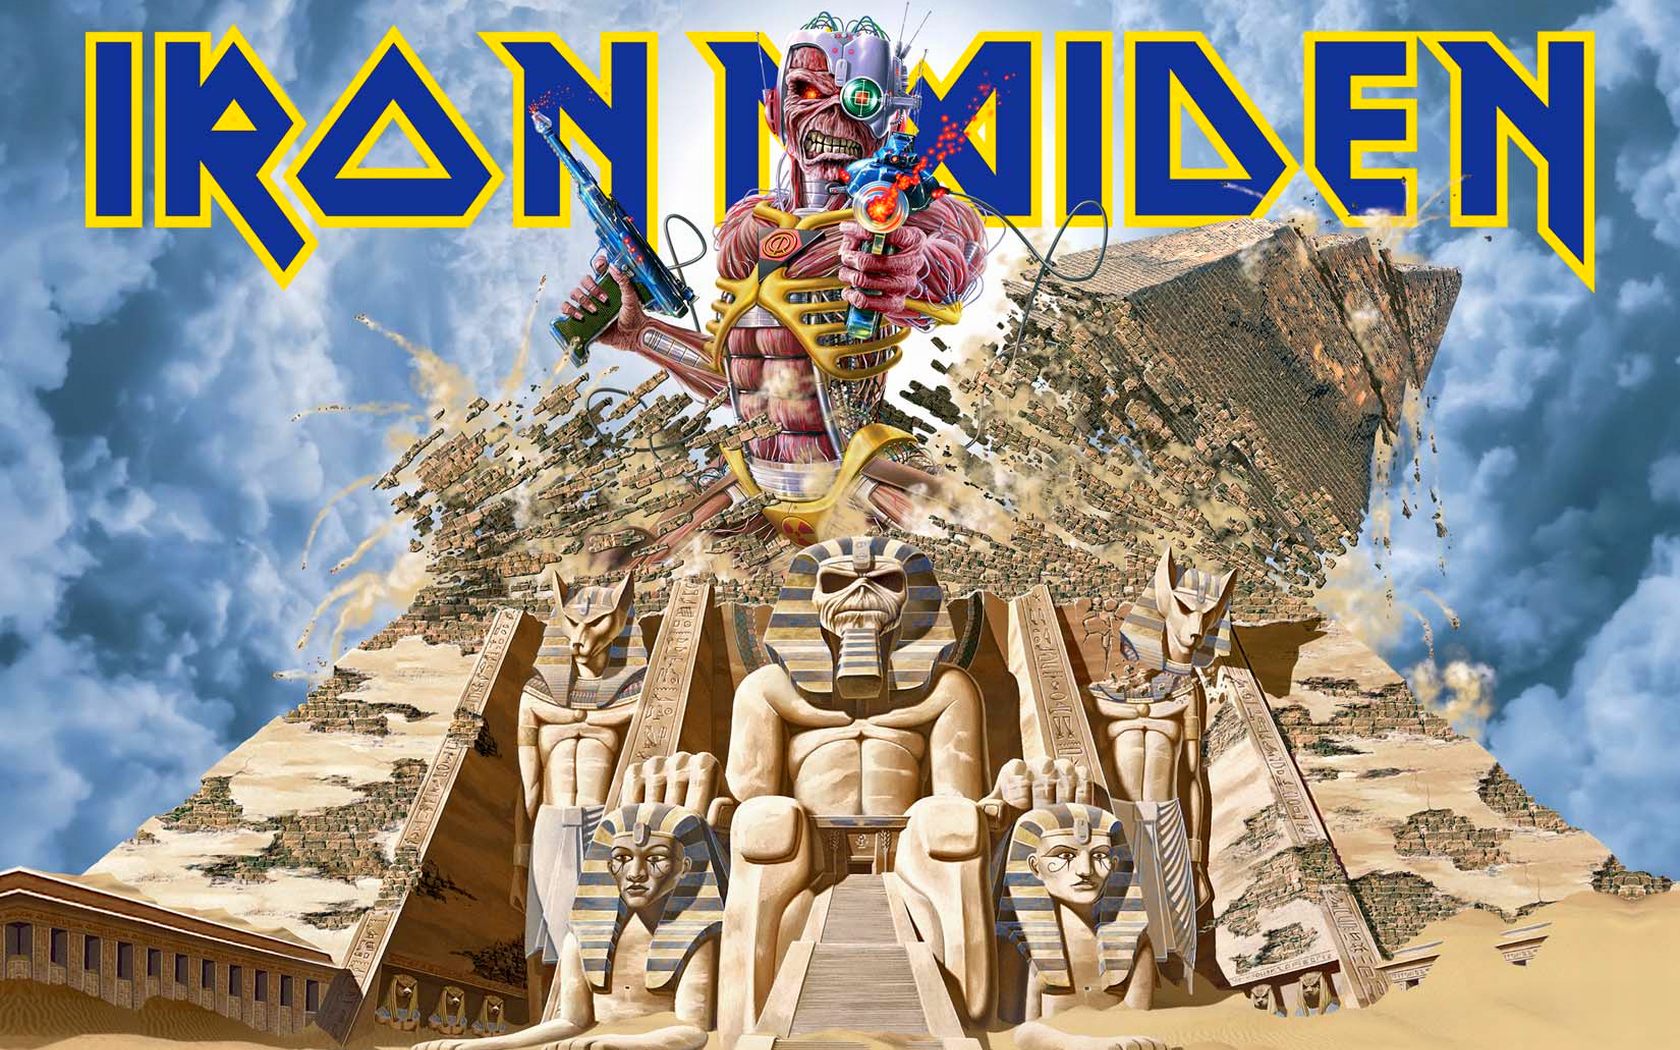 Iron Maiden Wallpaper And Background Image